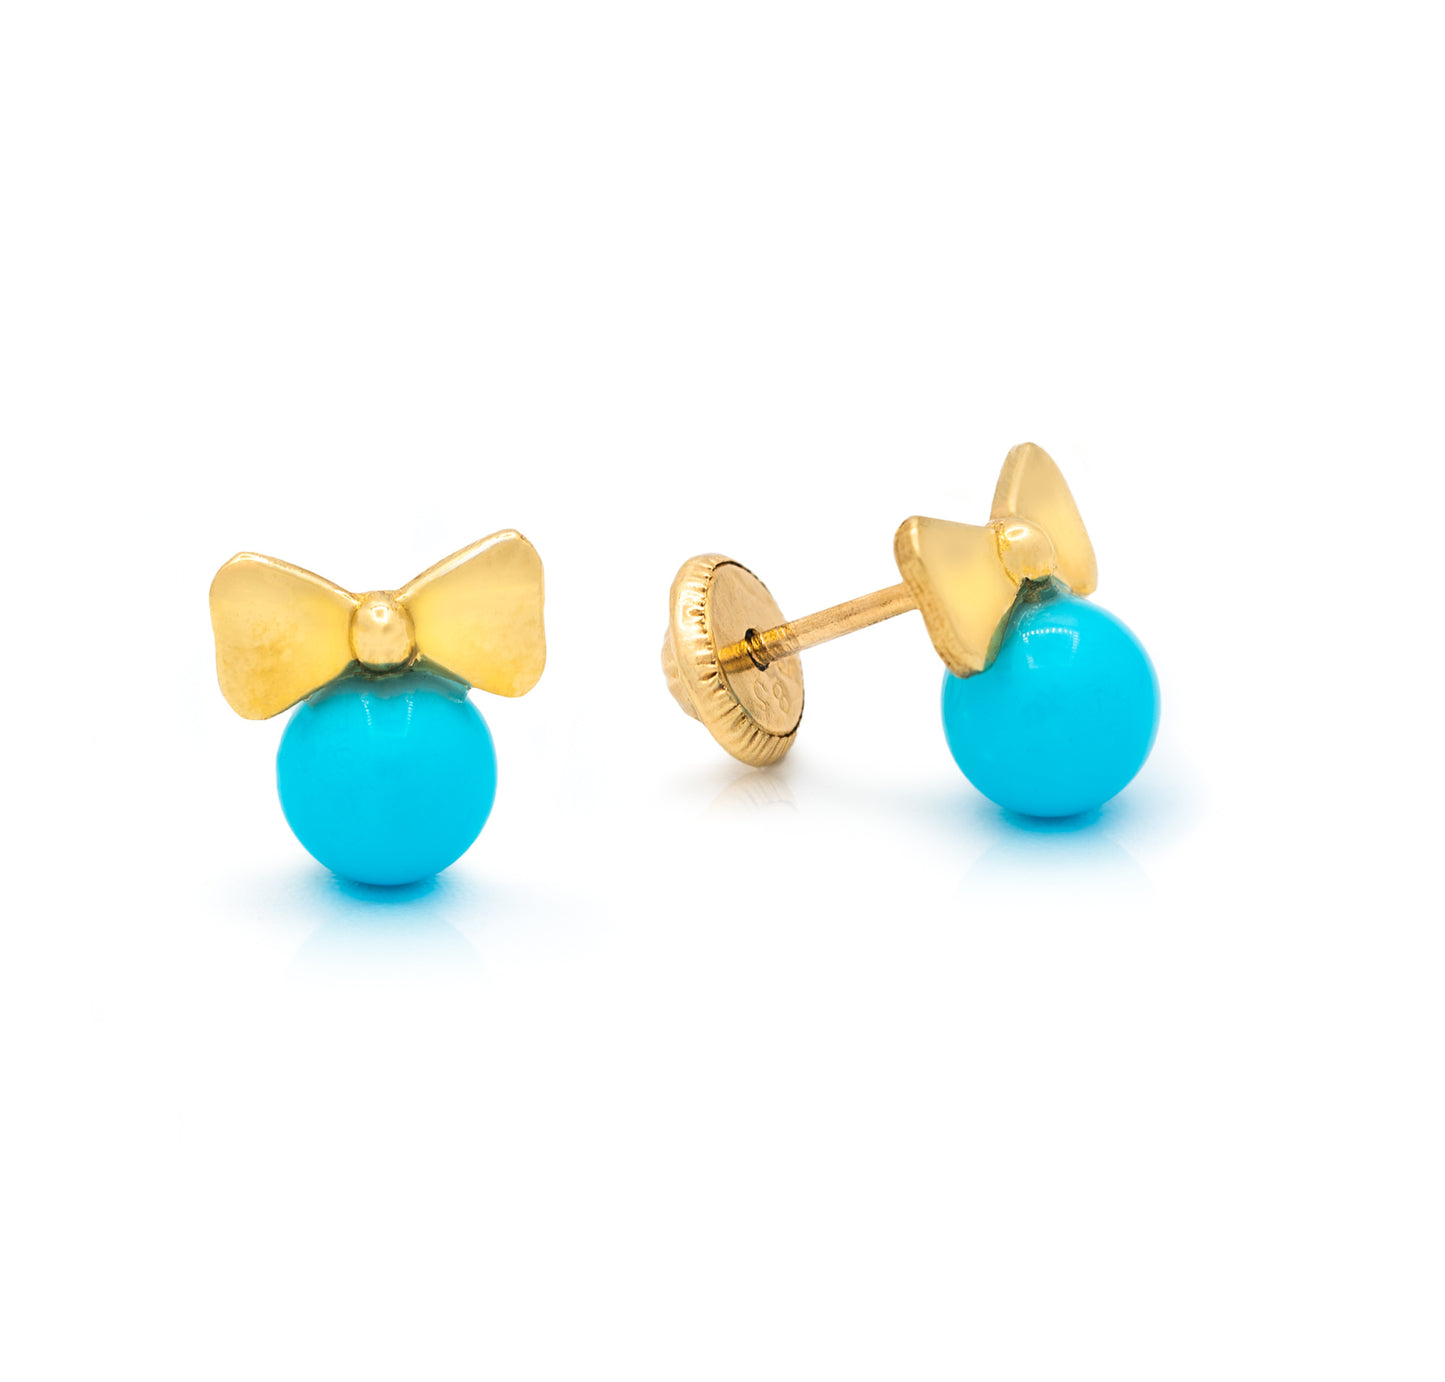 Pearl or Turquoise Bow Design Earrings